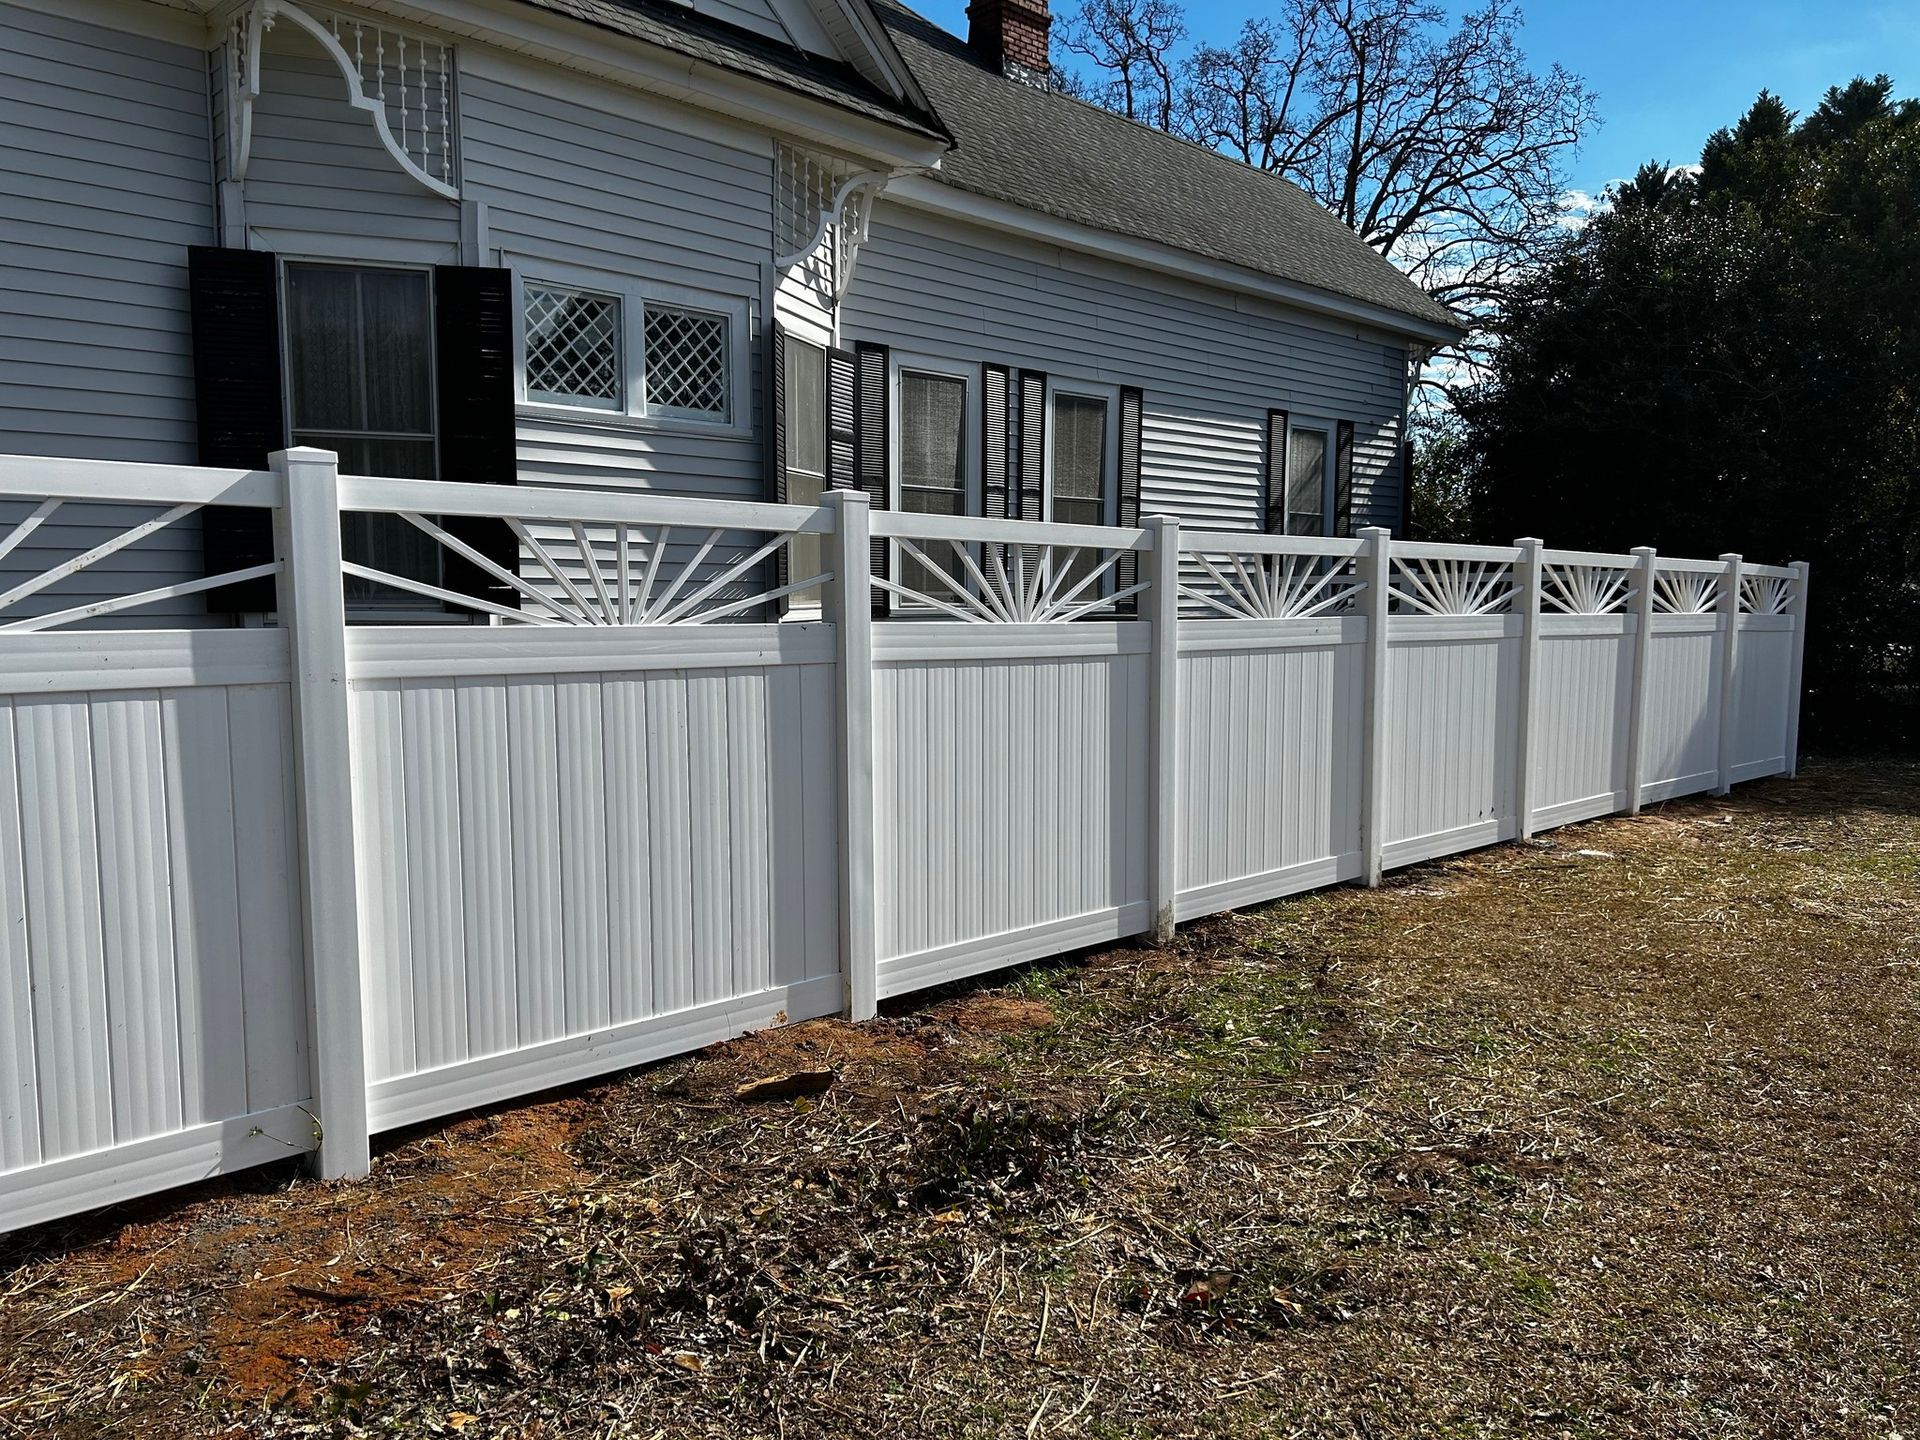 A white picket fence with trees in the background